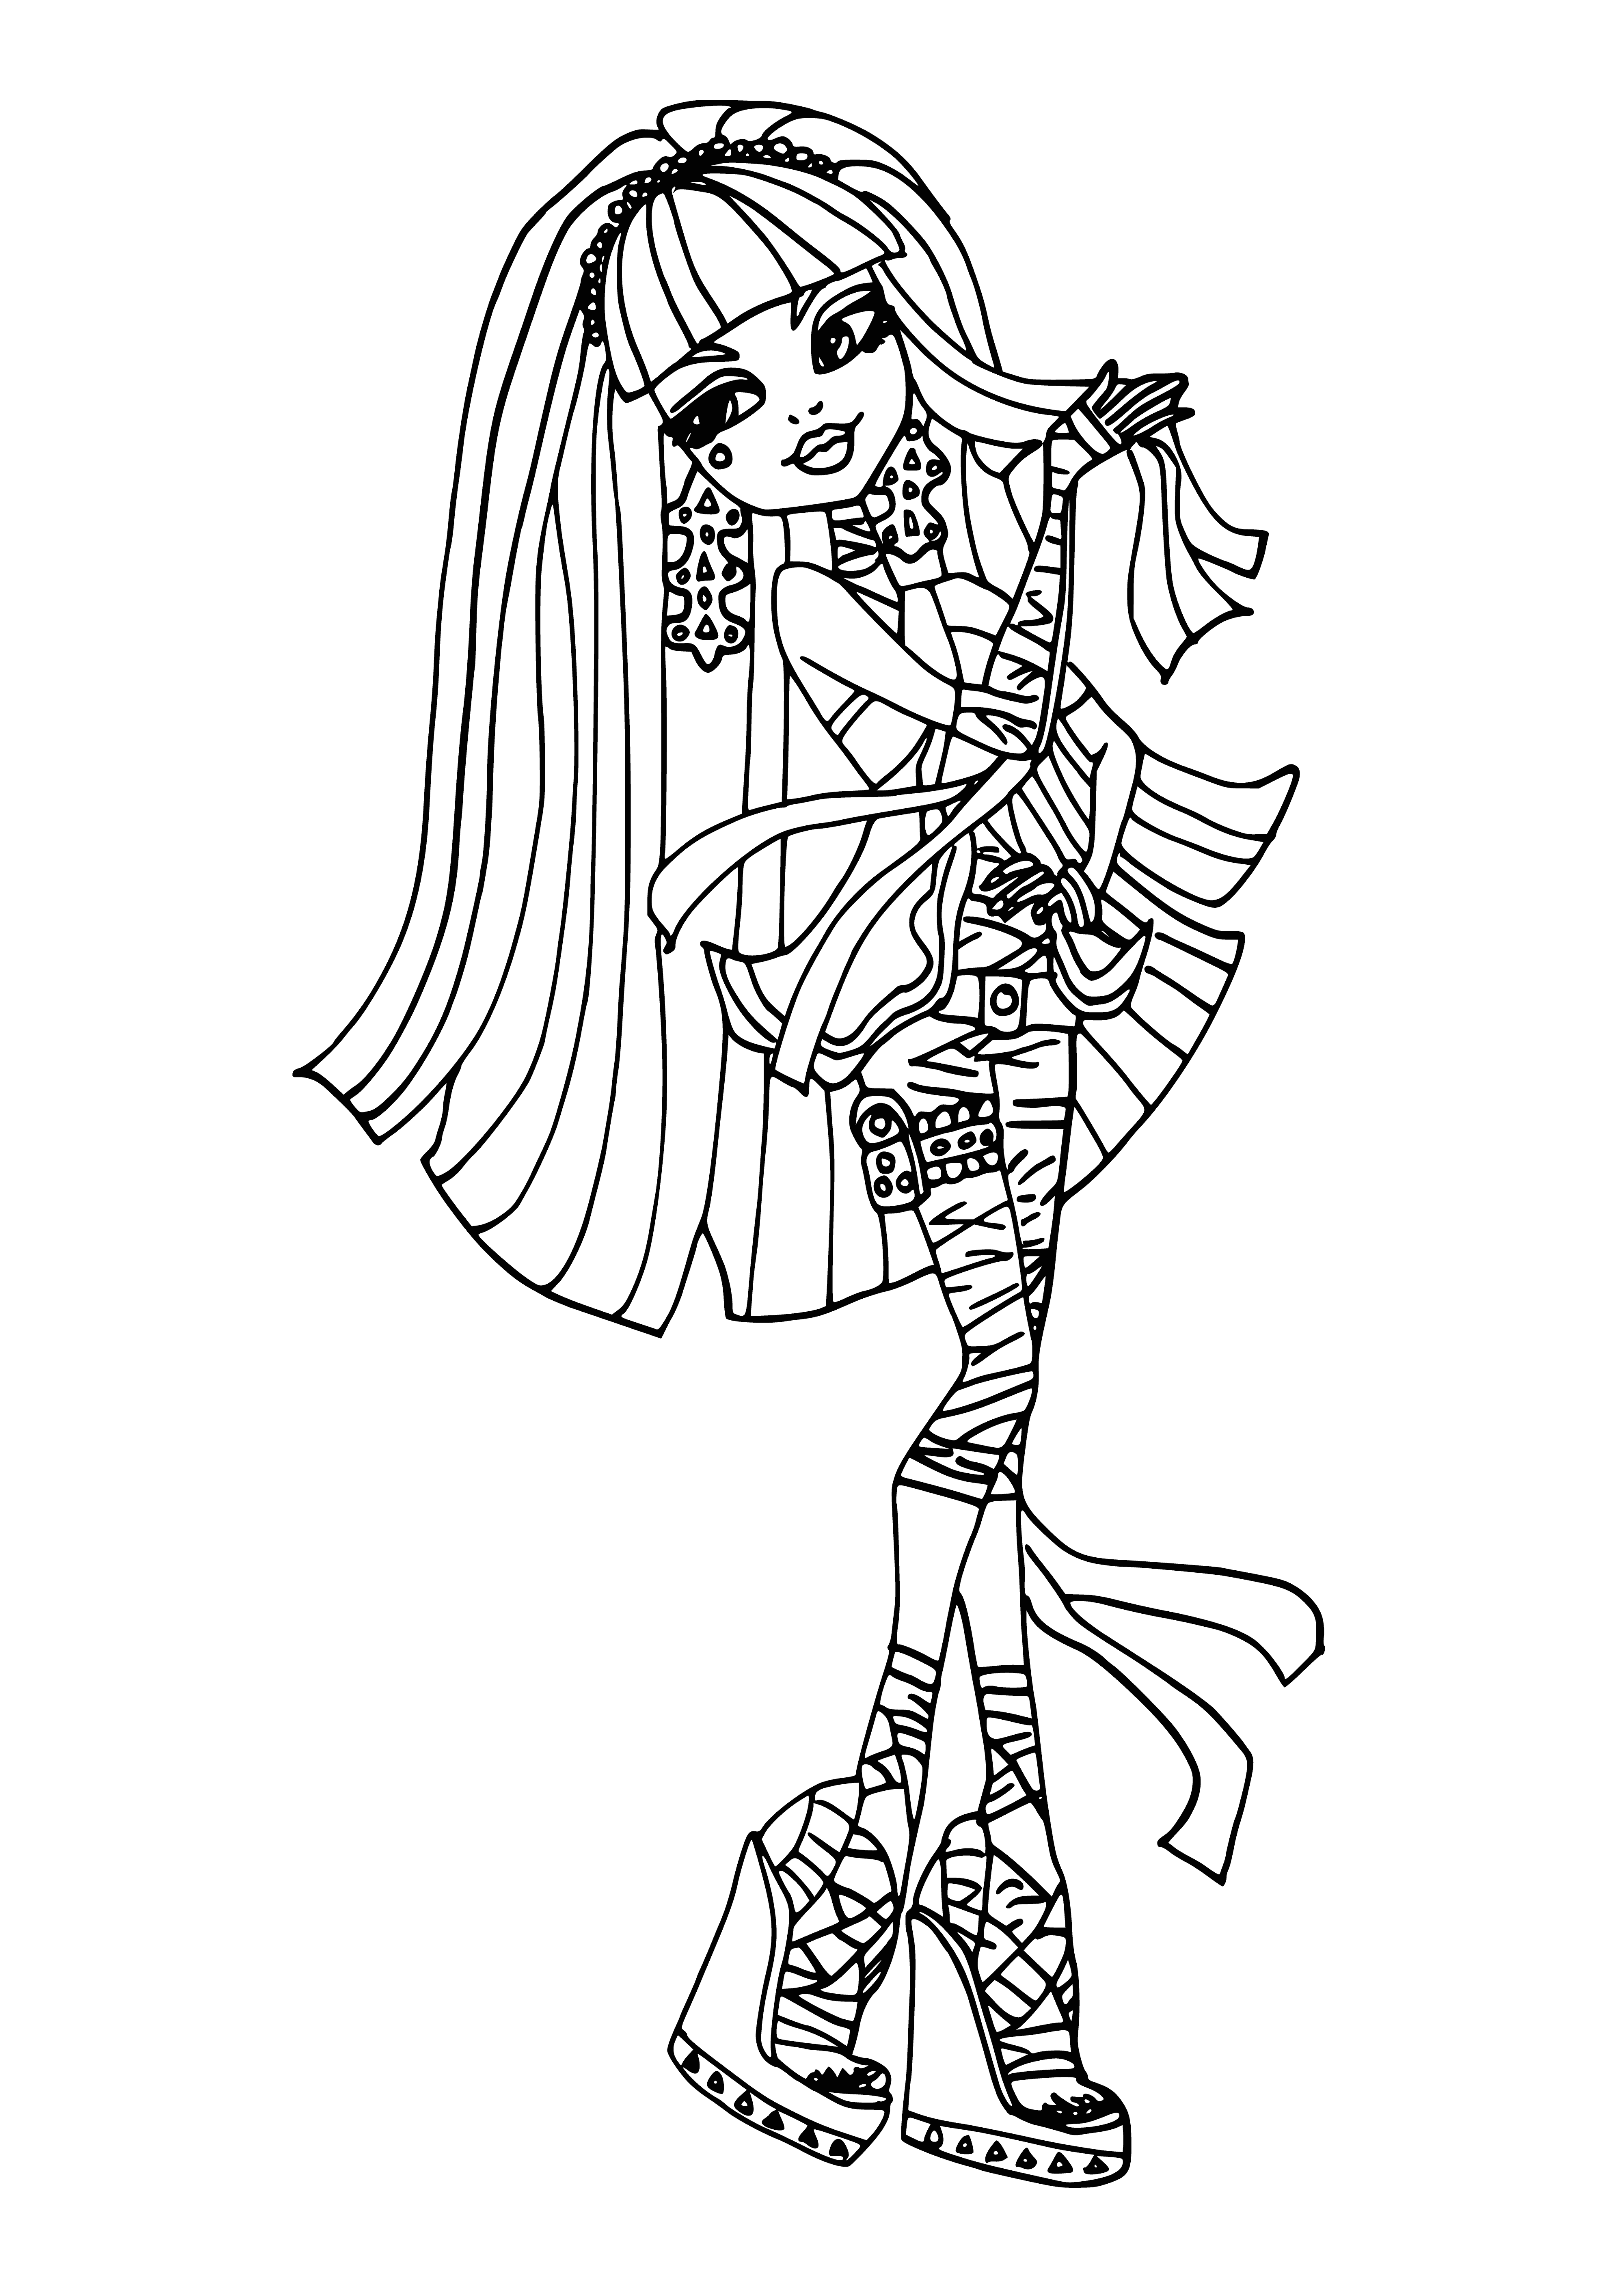 coloring page: Cleo de Nile is a porcelain doll with long, dark hair, greenish skin, and a gold snake headdress. She smiles, eyes closed, wearing a dark dress with green trim.